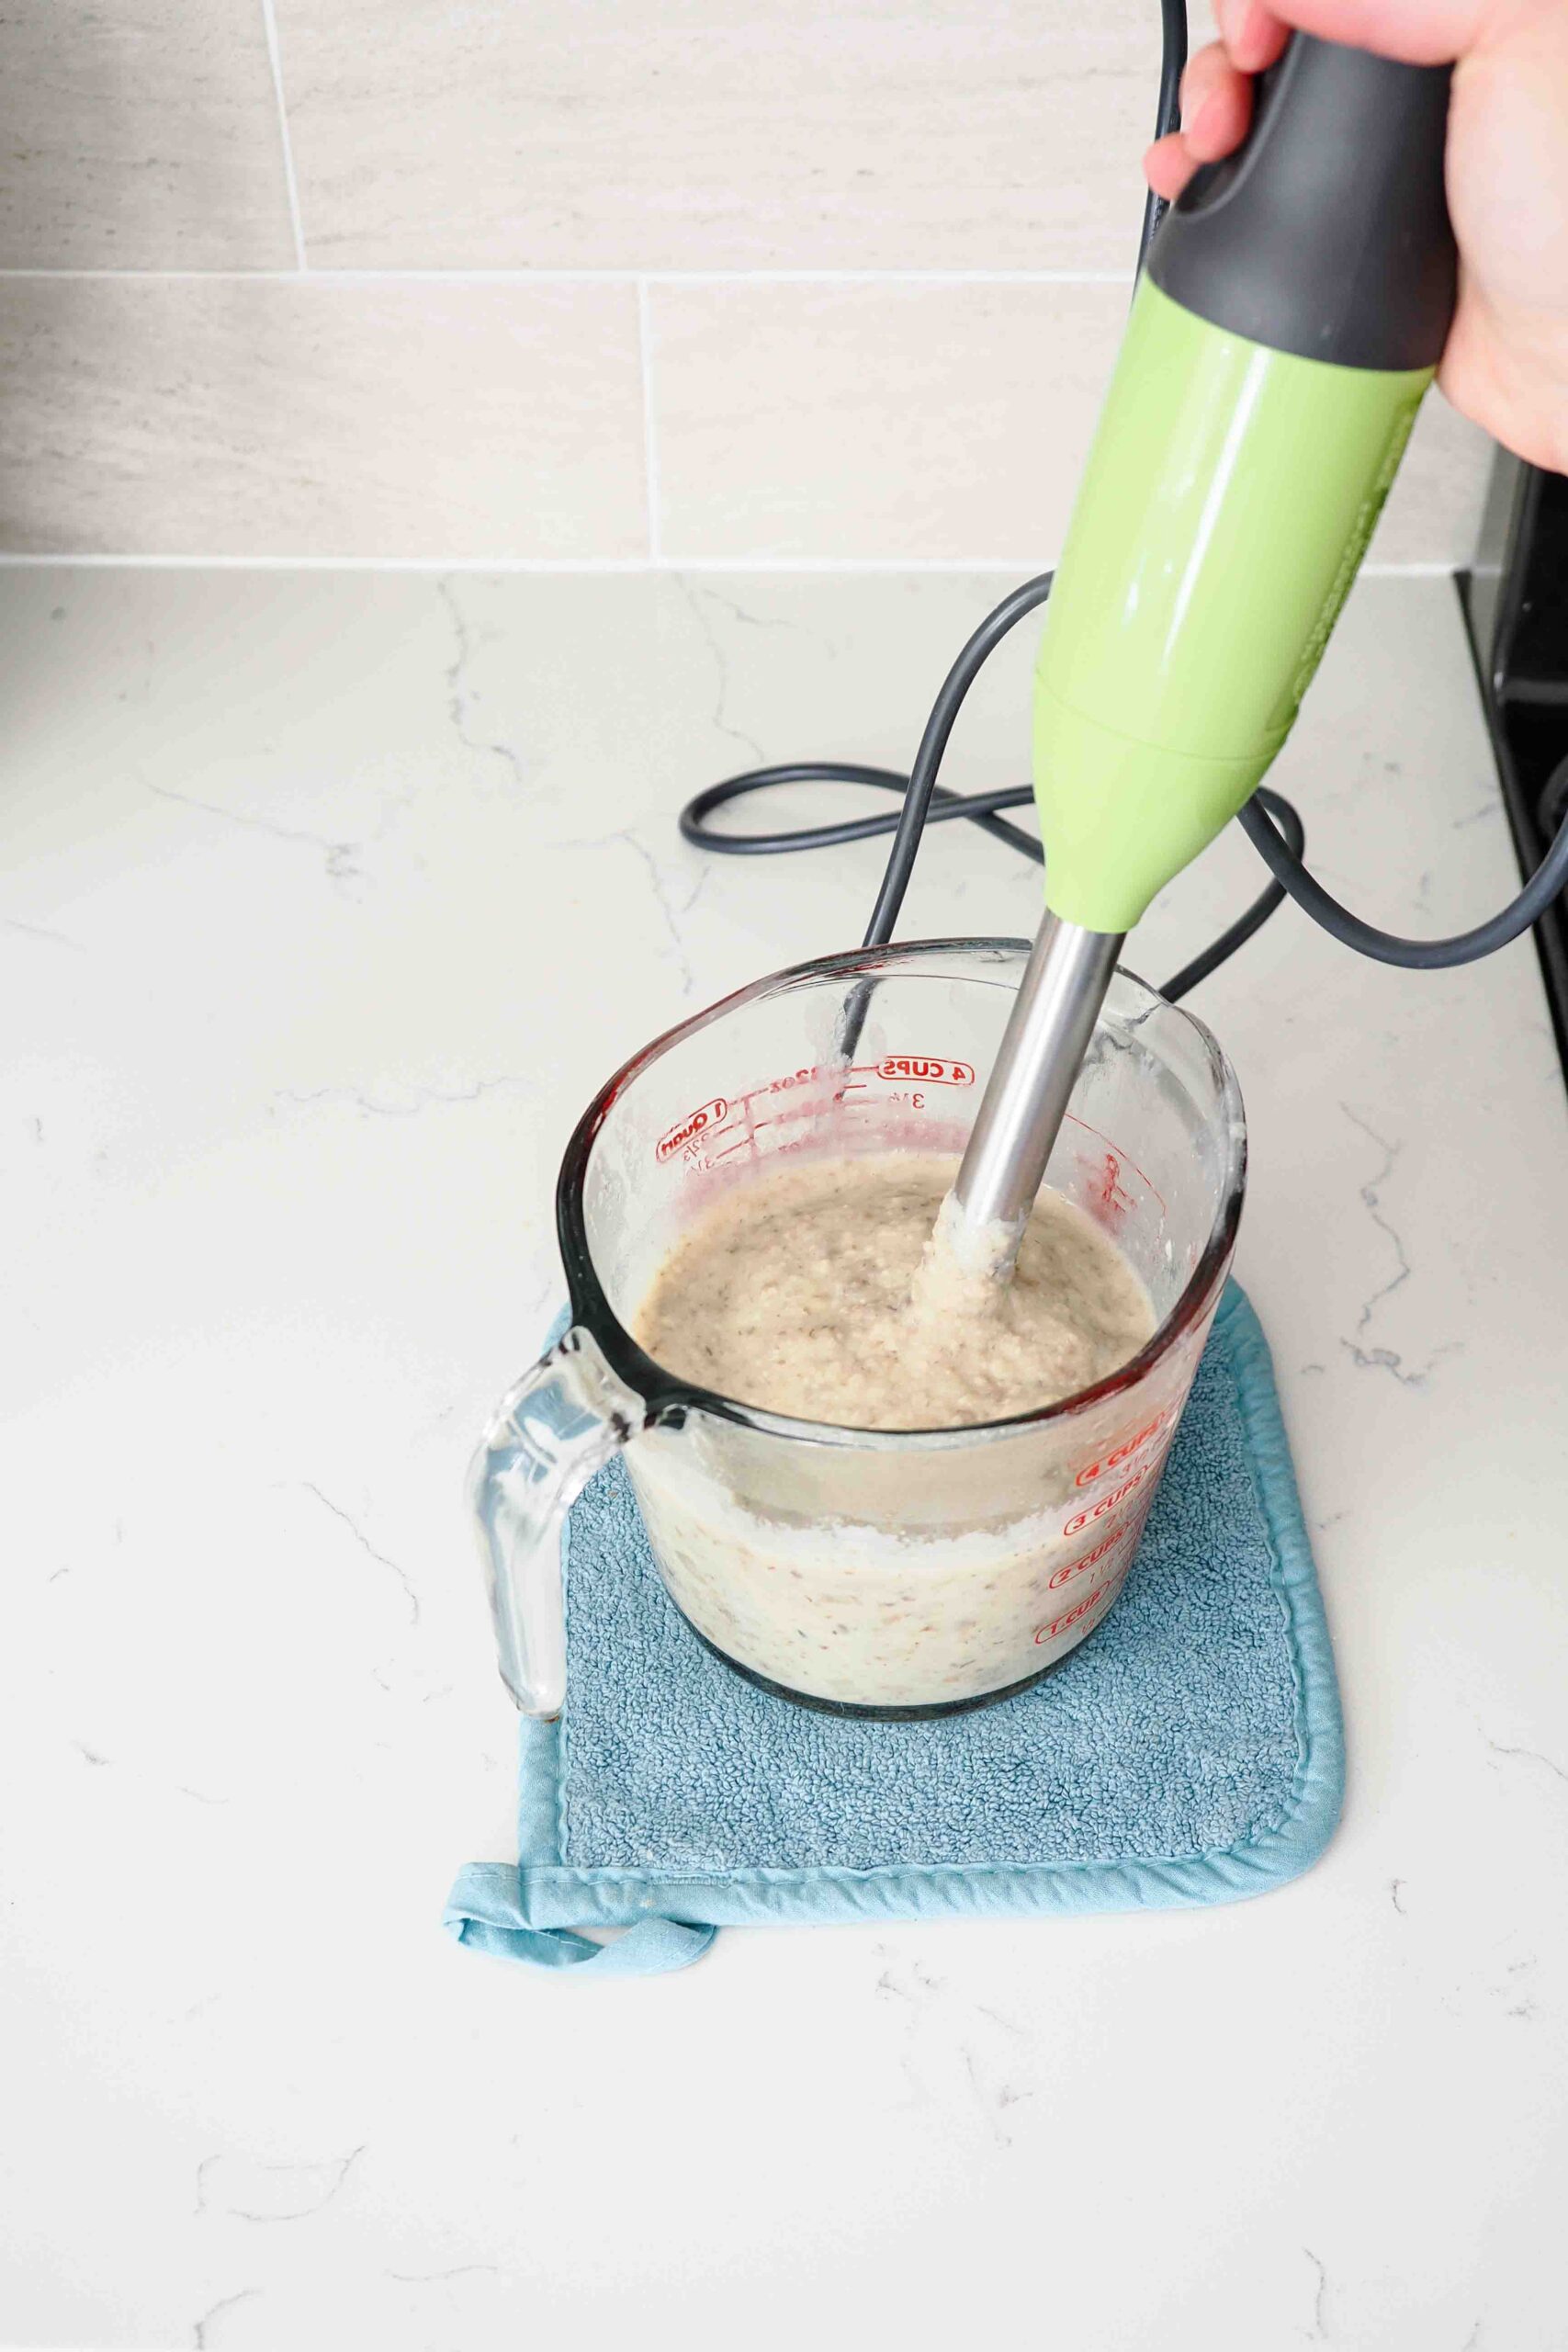 An immersion blender sticks out of a measuring cup with thick, blended soup.